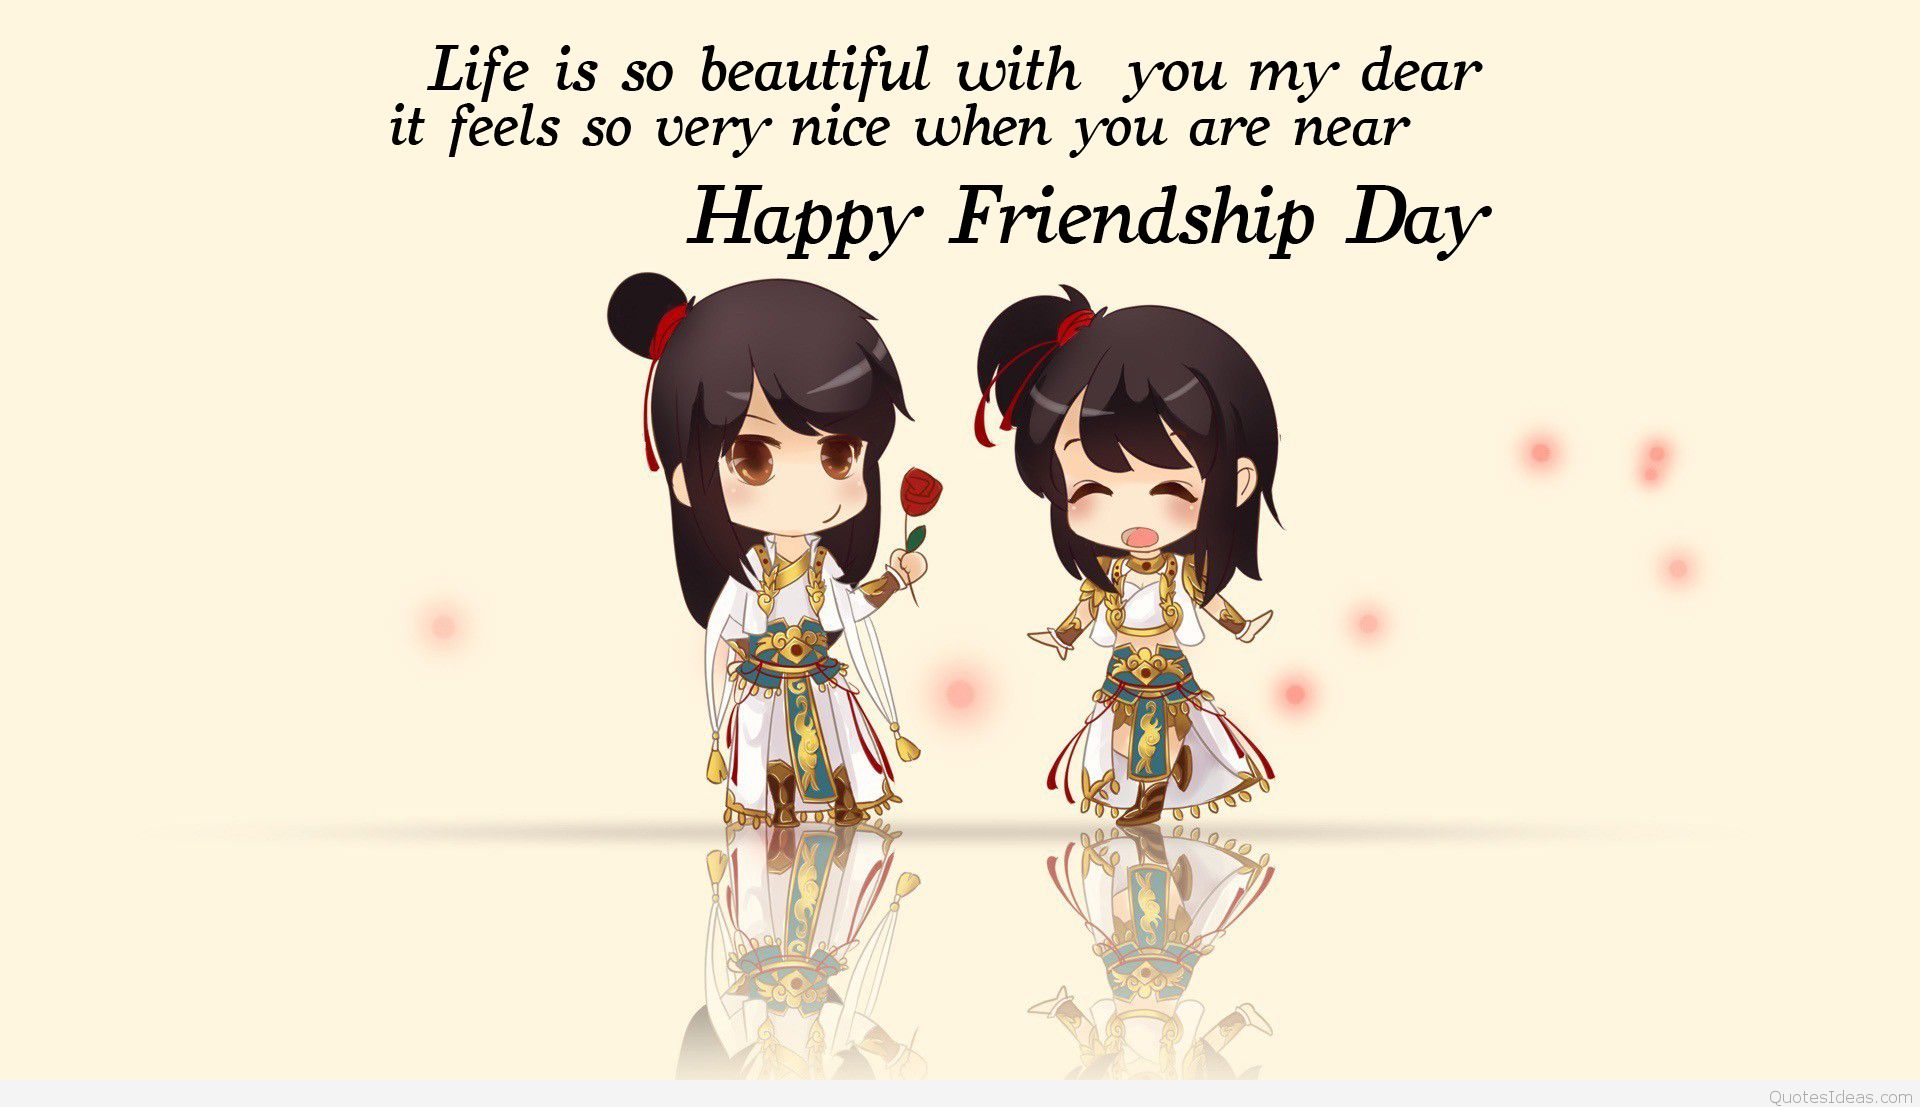 Happy Friendship Day Quotes Friendship Day Images - Quote Happy Friendship Day - HD Wallpaper 